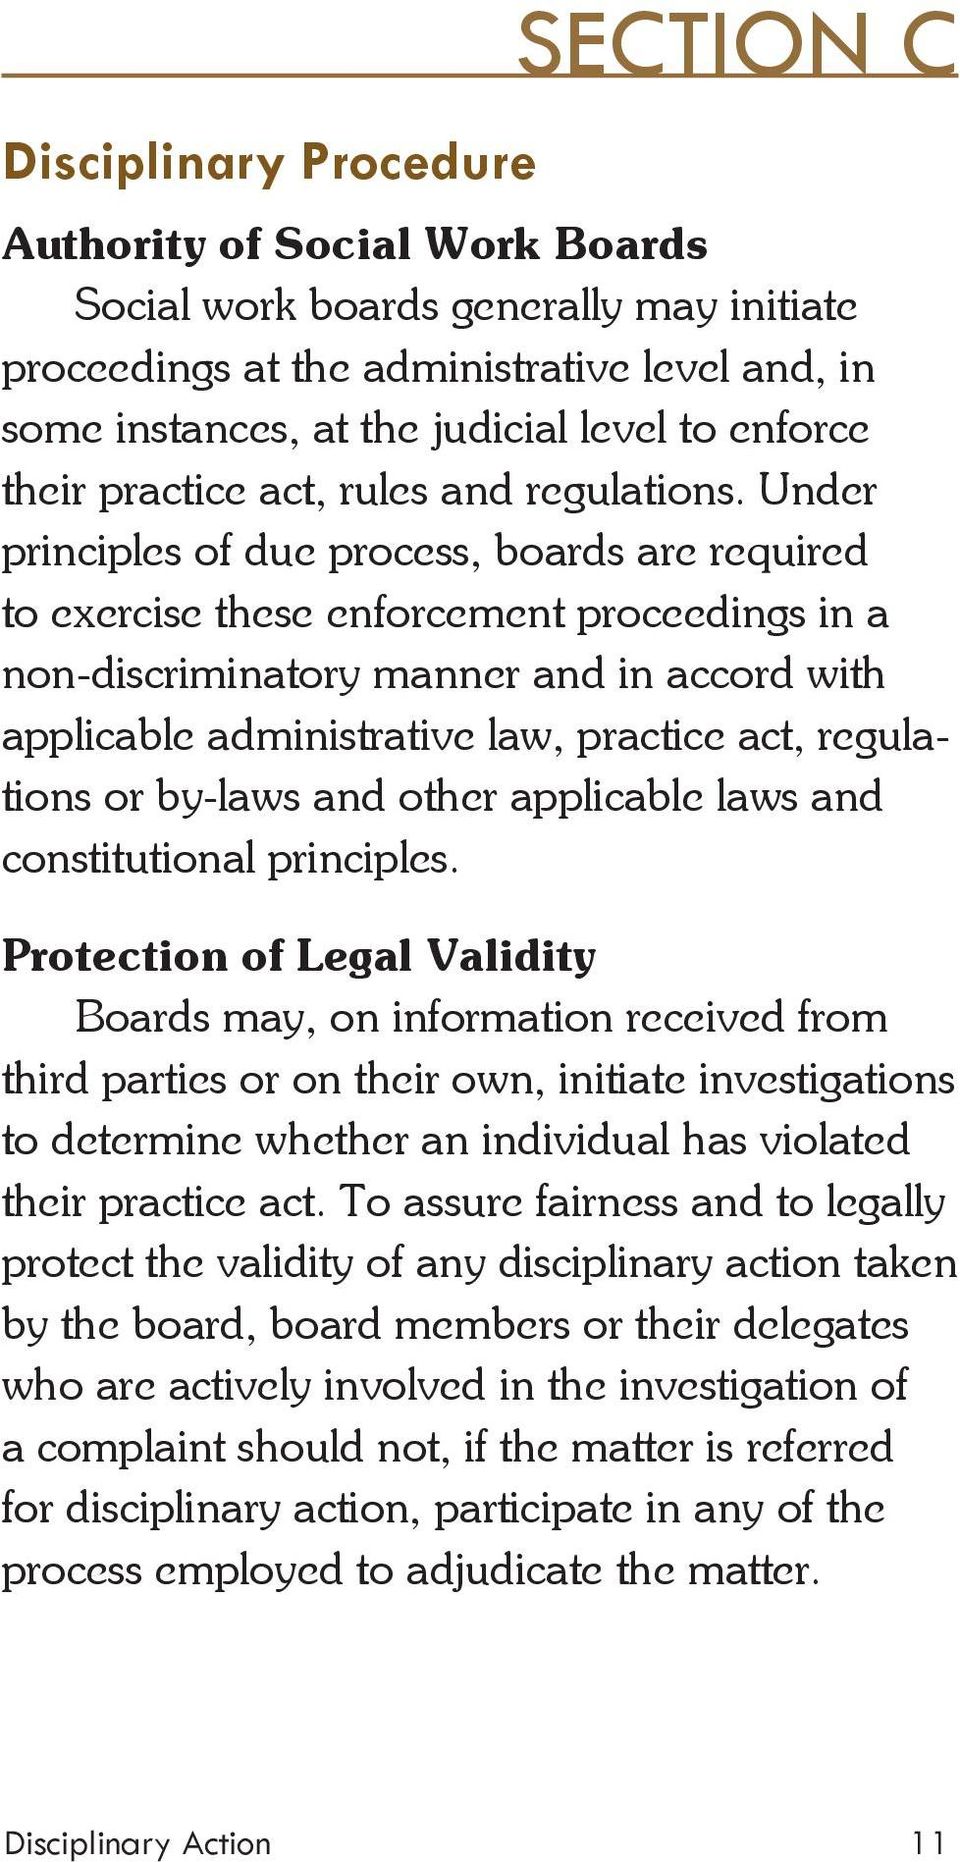 Under principles of due process, boards are required to exercise these enforcement proceedings in a non-discriminatory manner and in accord with applicable administrative law, practice act,